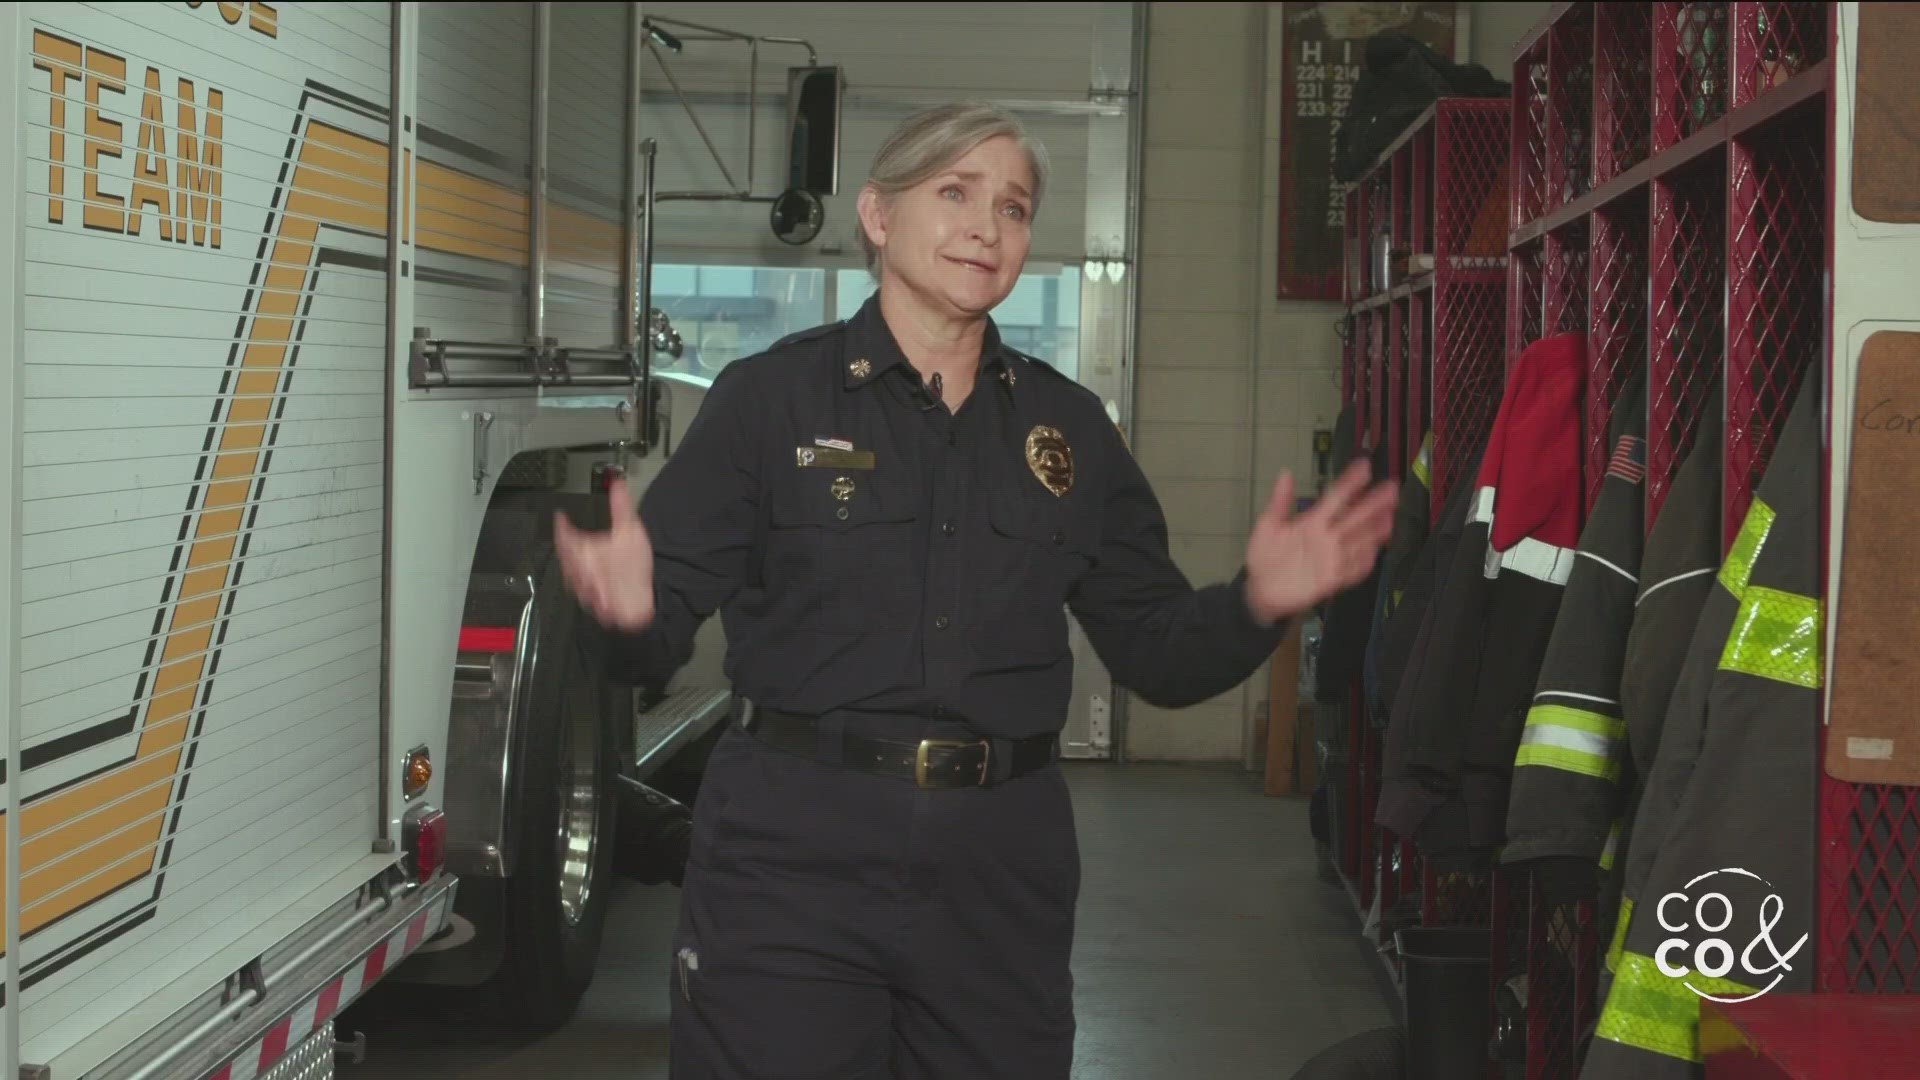 Kathleen Vredenburgh is the only woman to ever hold the title of Deputy Fire Chief within the Denver fire department.